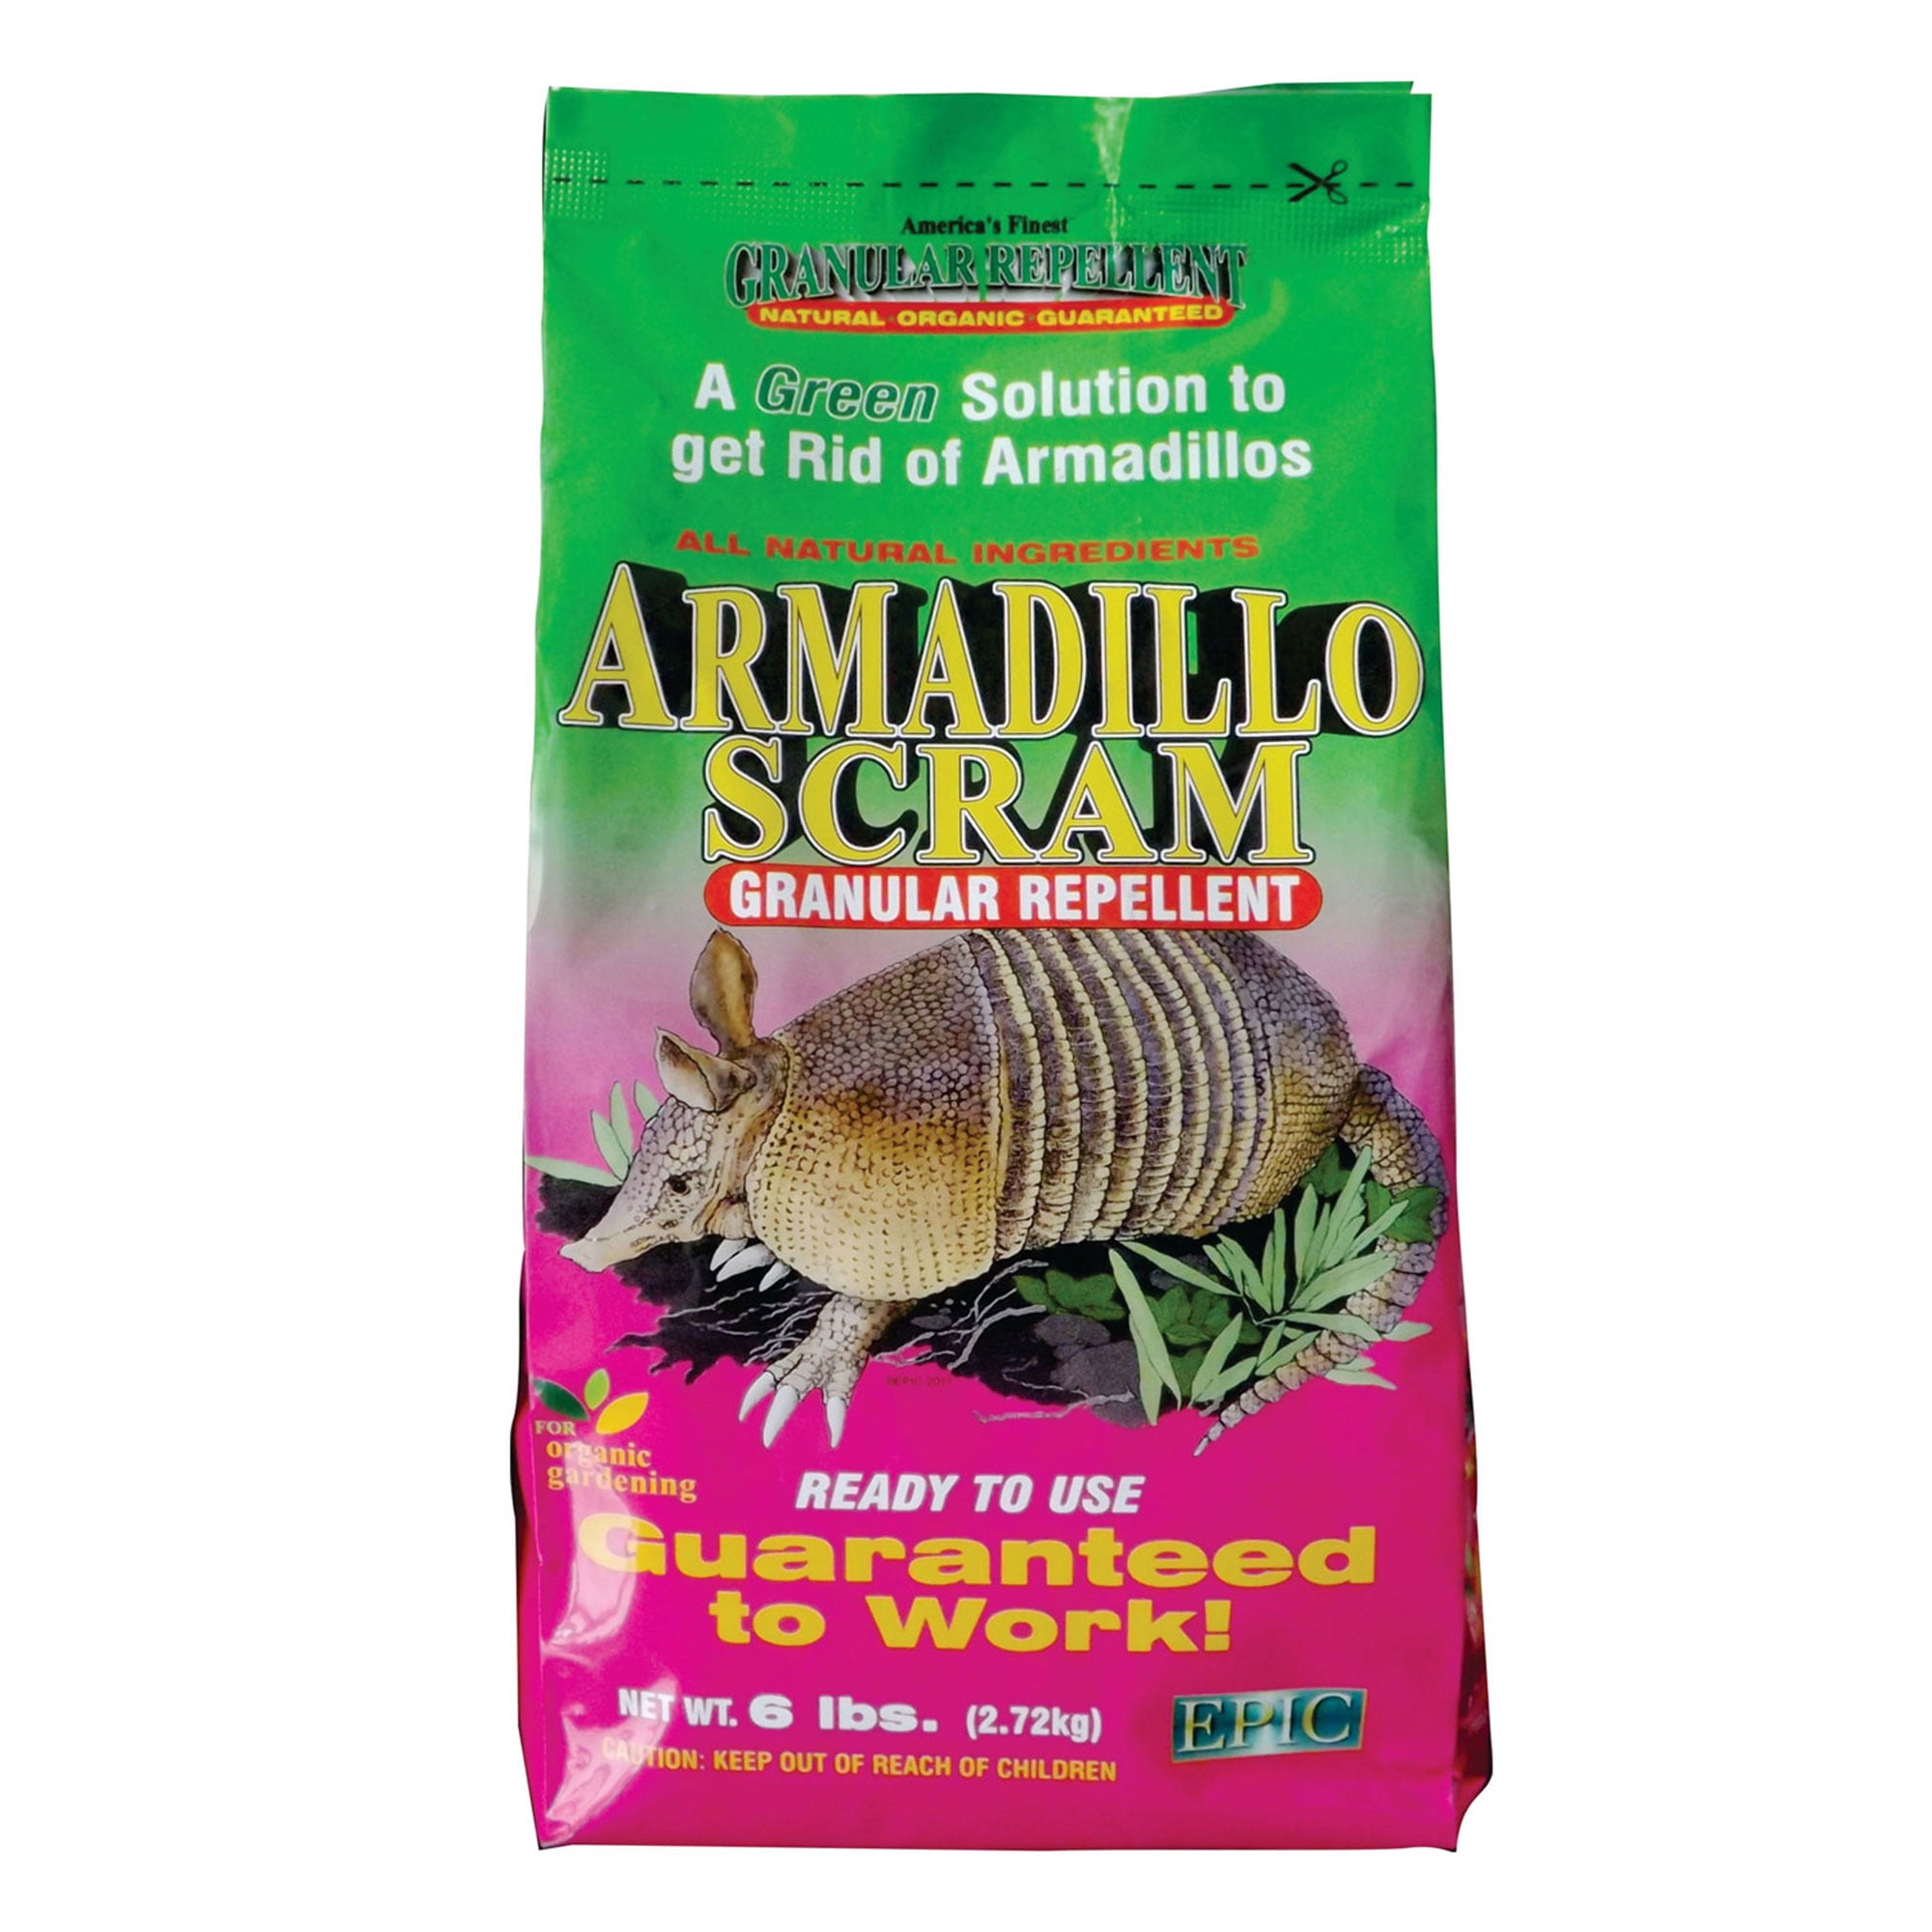 EPIC Armadillo Scram Pro 25# Pail Natural and Safe Repellent 